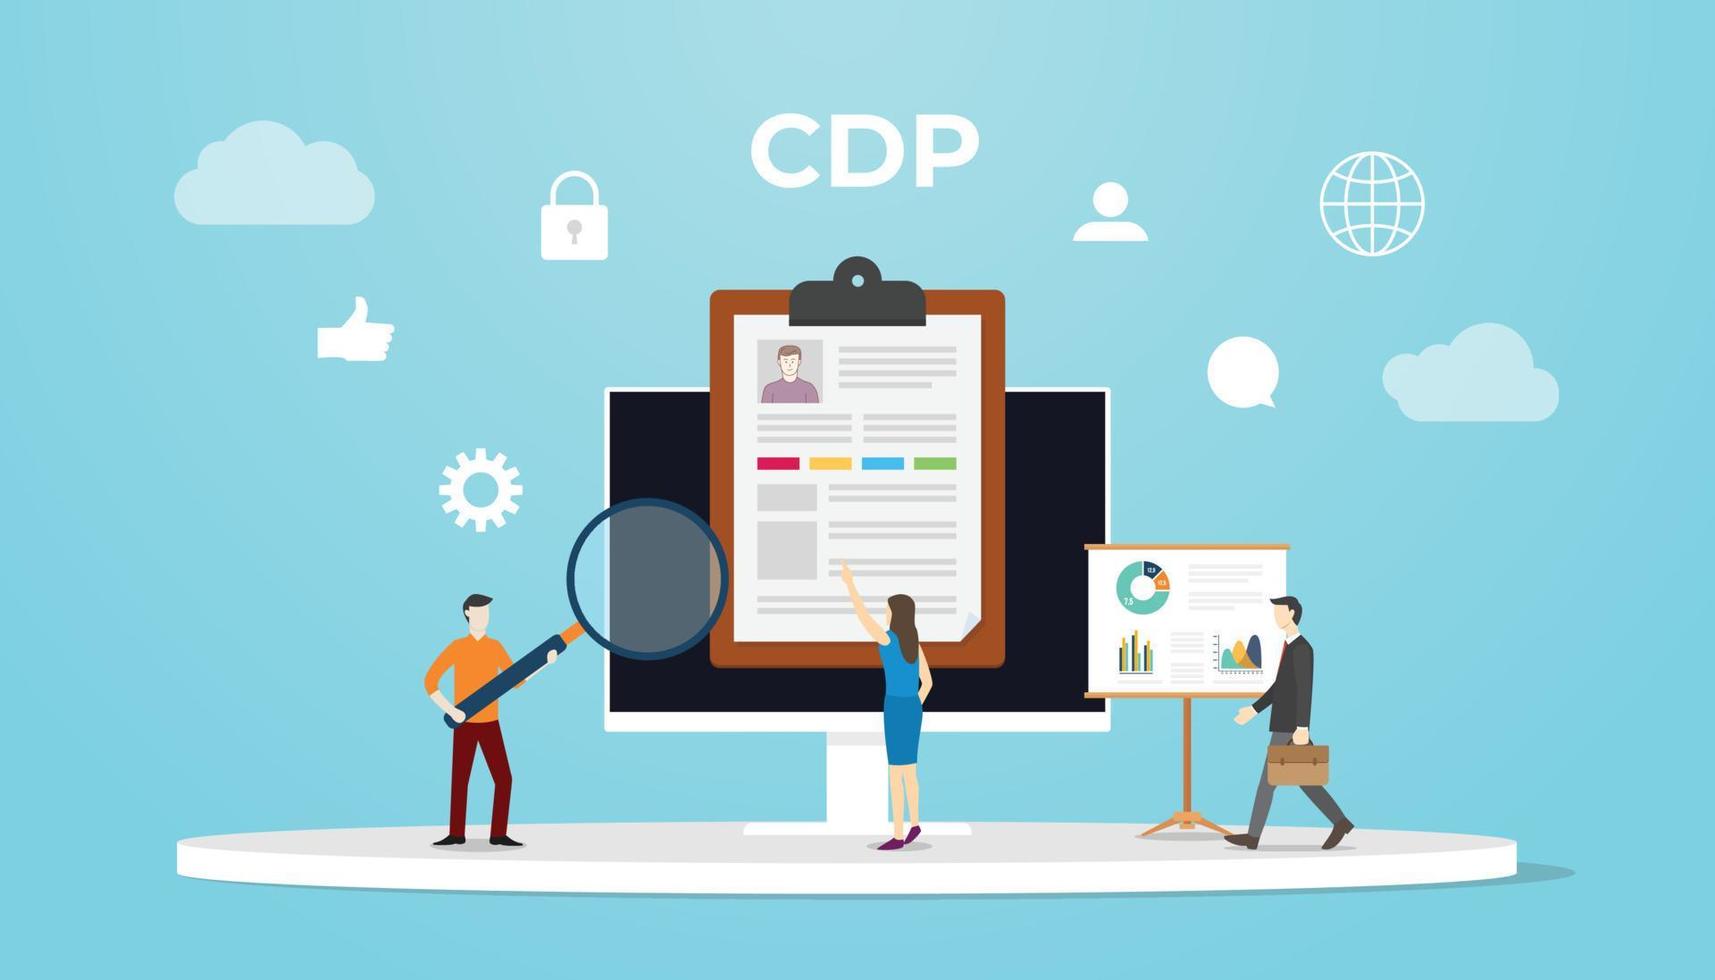 cdp customer data platform concept with people analyze data with icon and computer with modern flat style vector